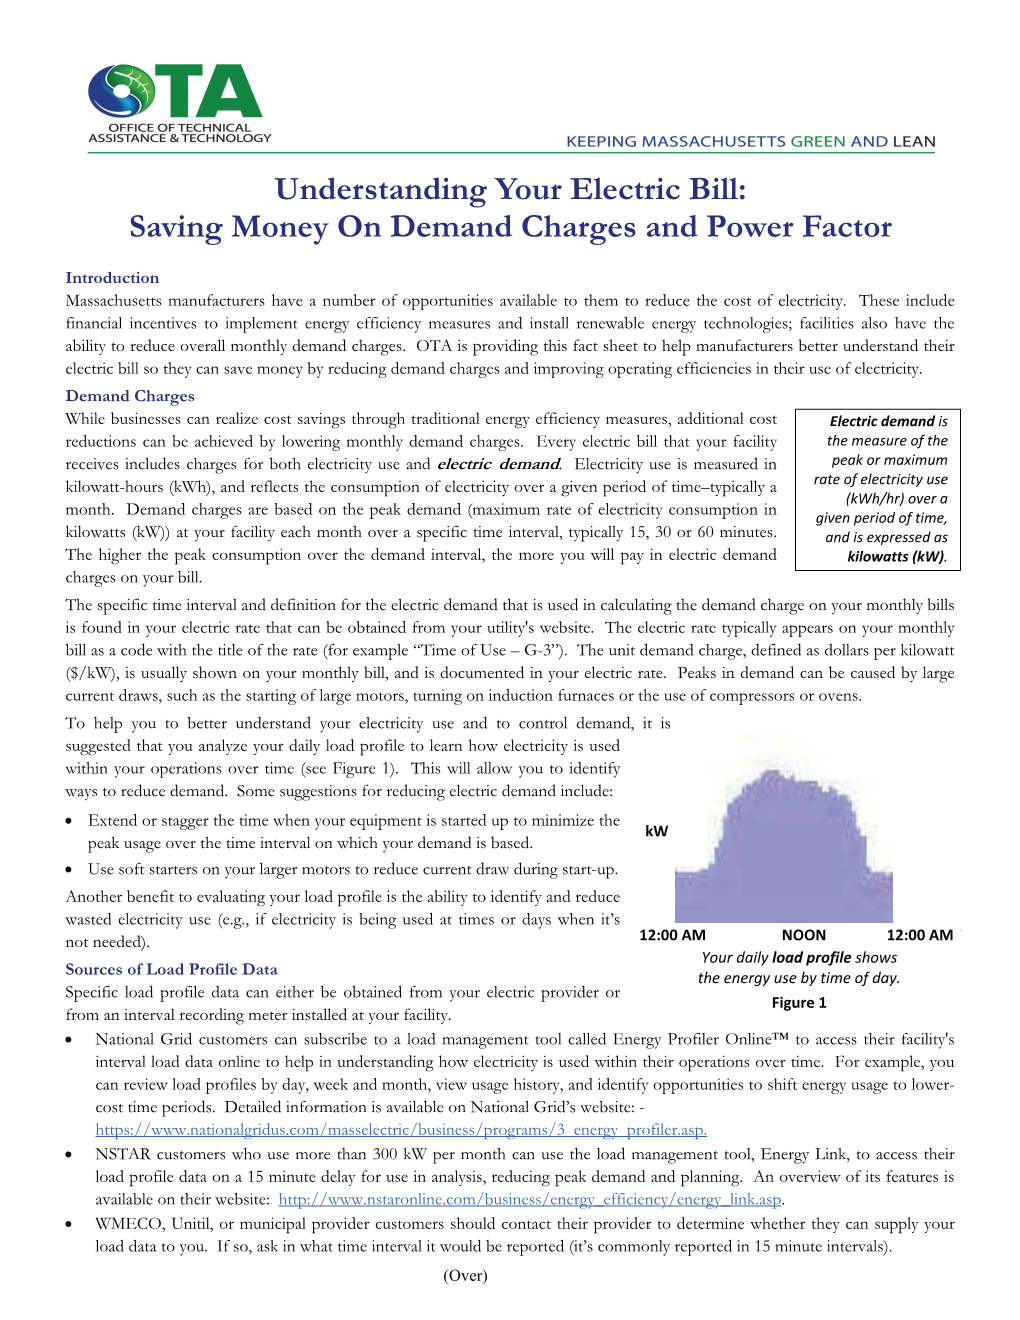 Saving Money on Demand Charges and Power Factor